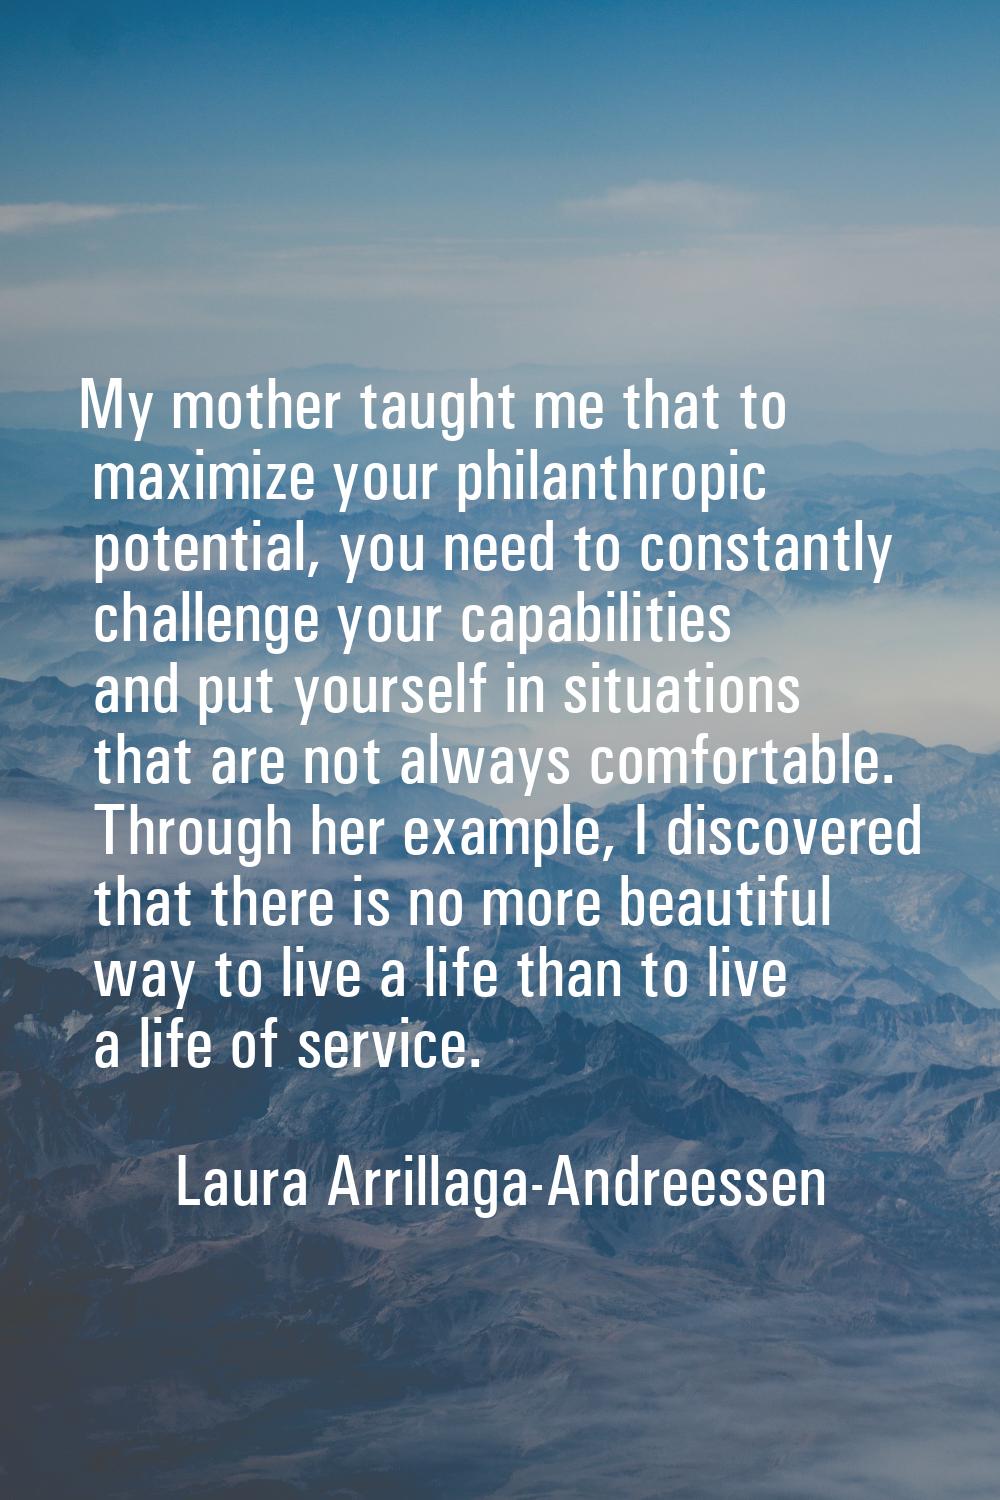 My mother taught me that to maximize your philanthropic potential, you need to constantly challenge